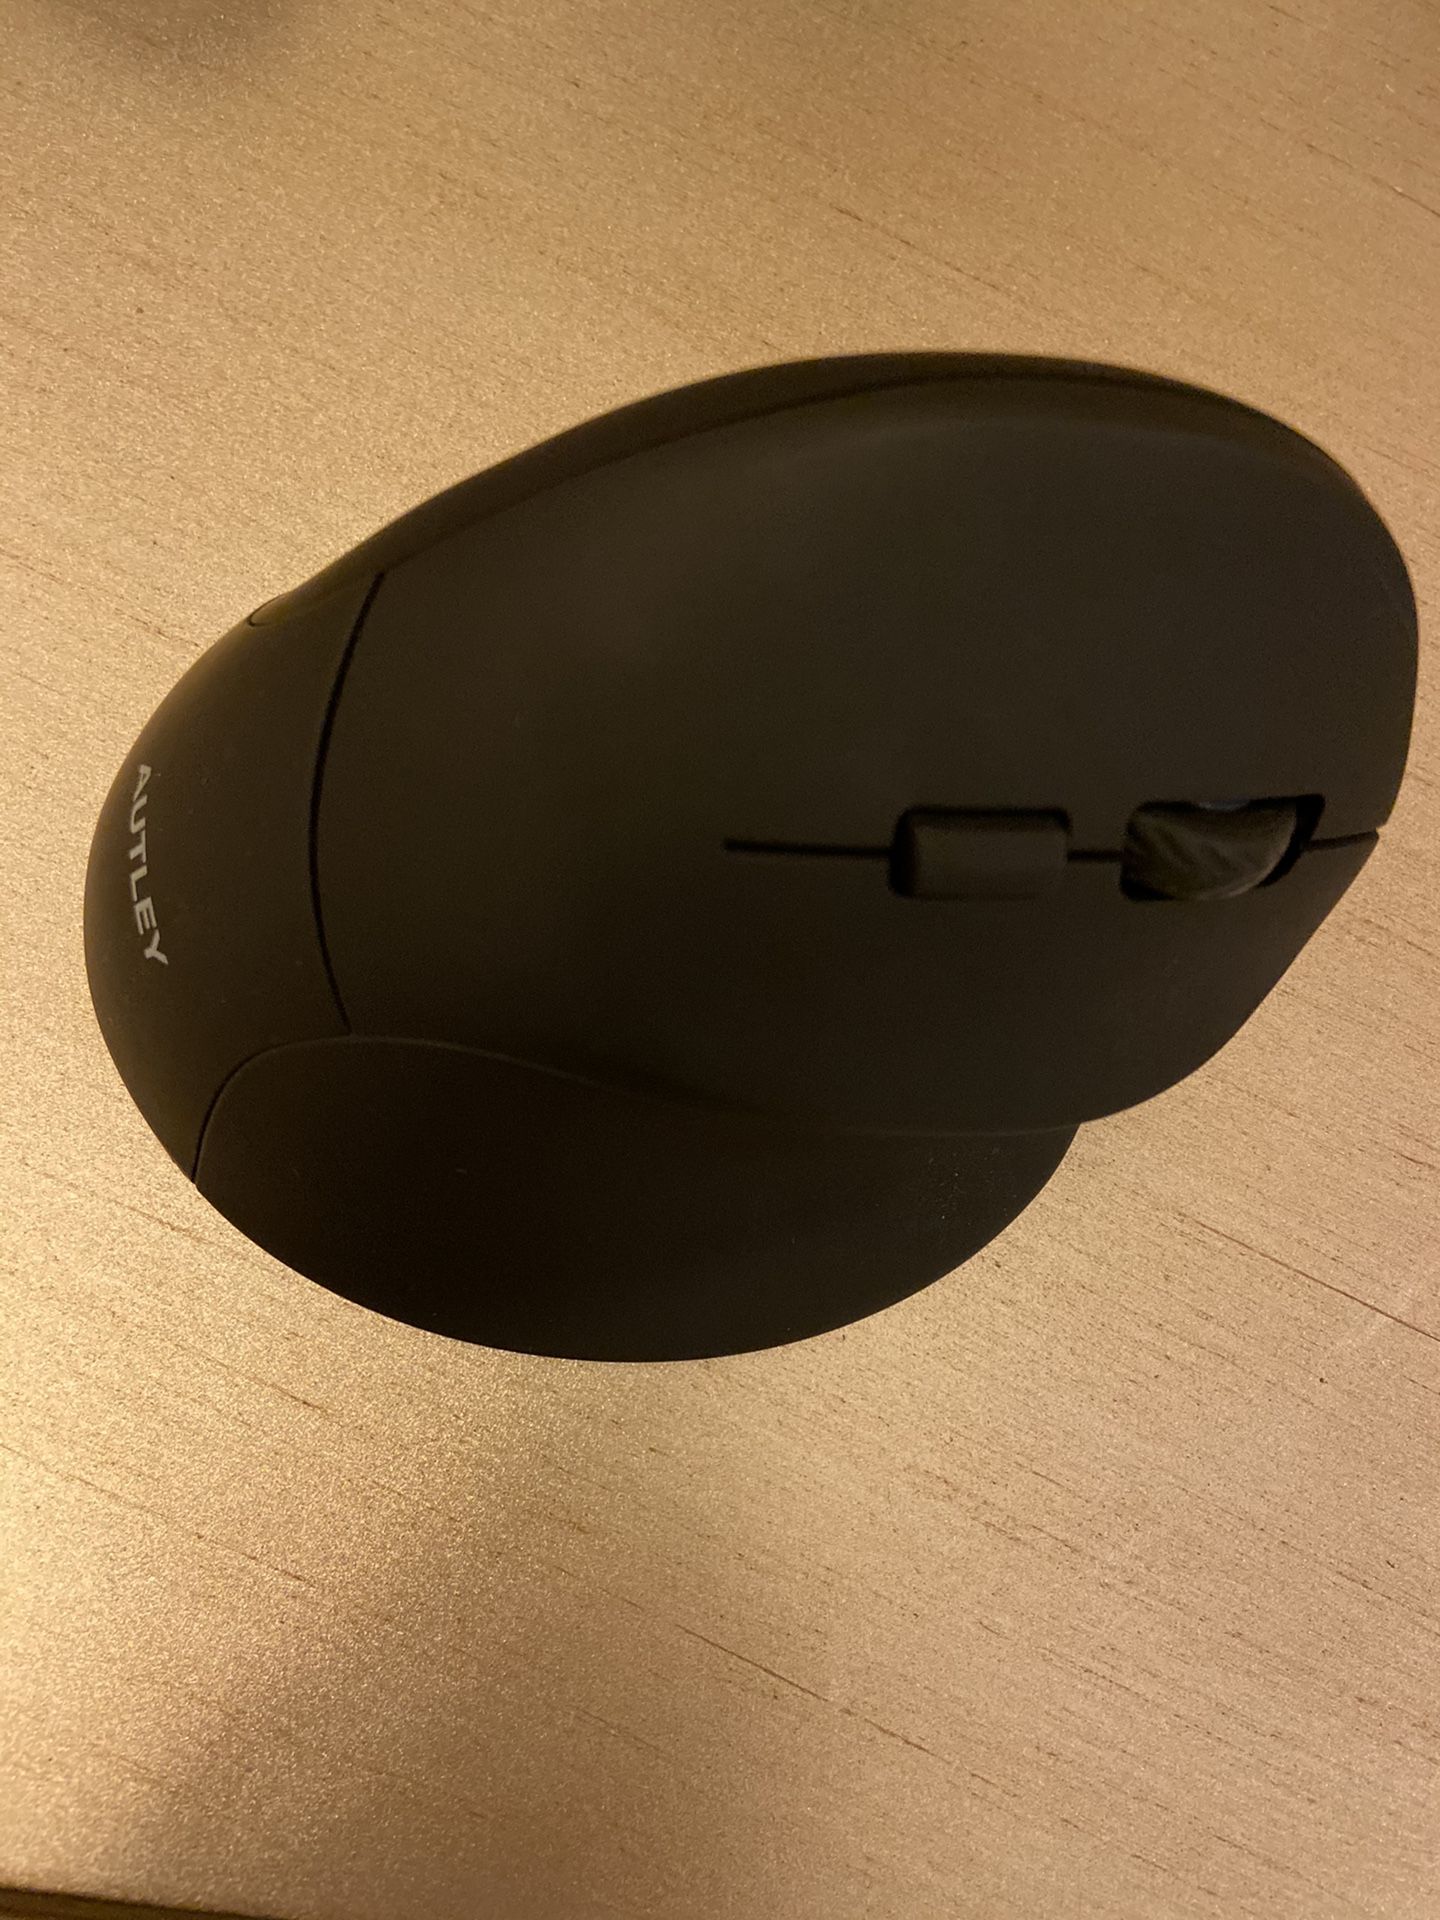 AUTLEY Wireless Vertical Mouse, 2.4G Optical Wireless Silent Ergonomic Mouse